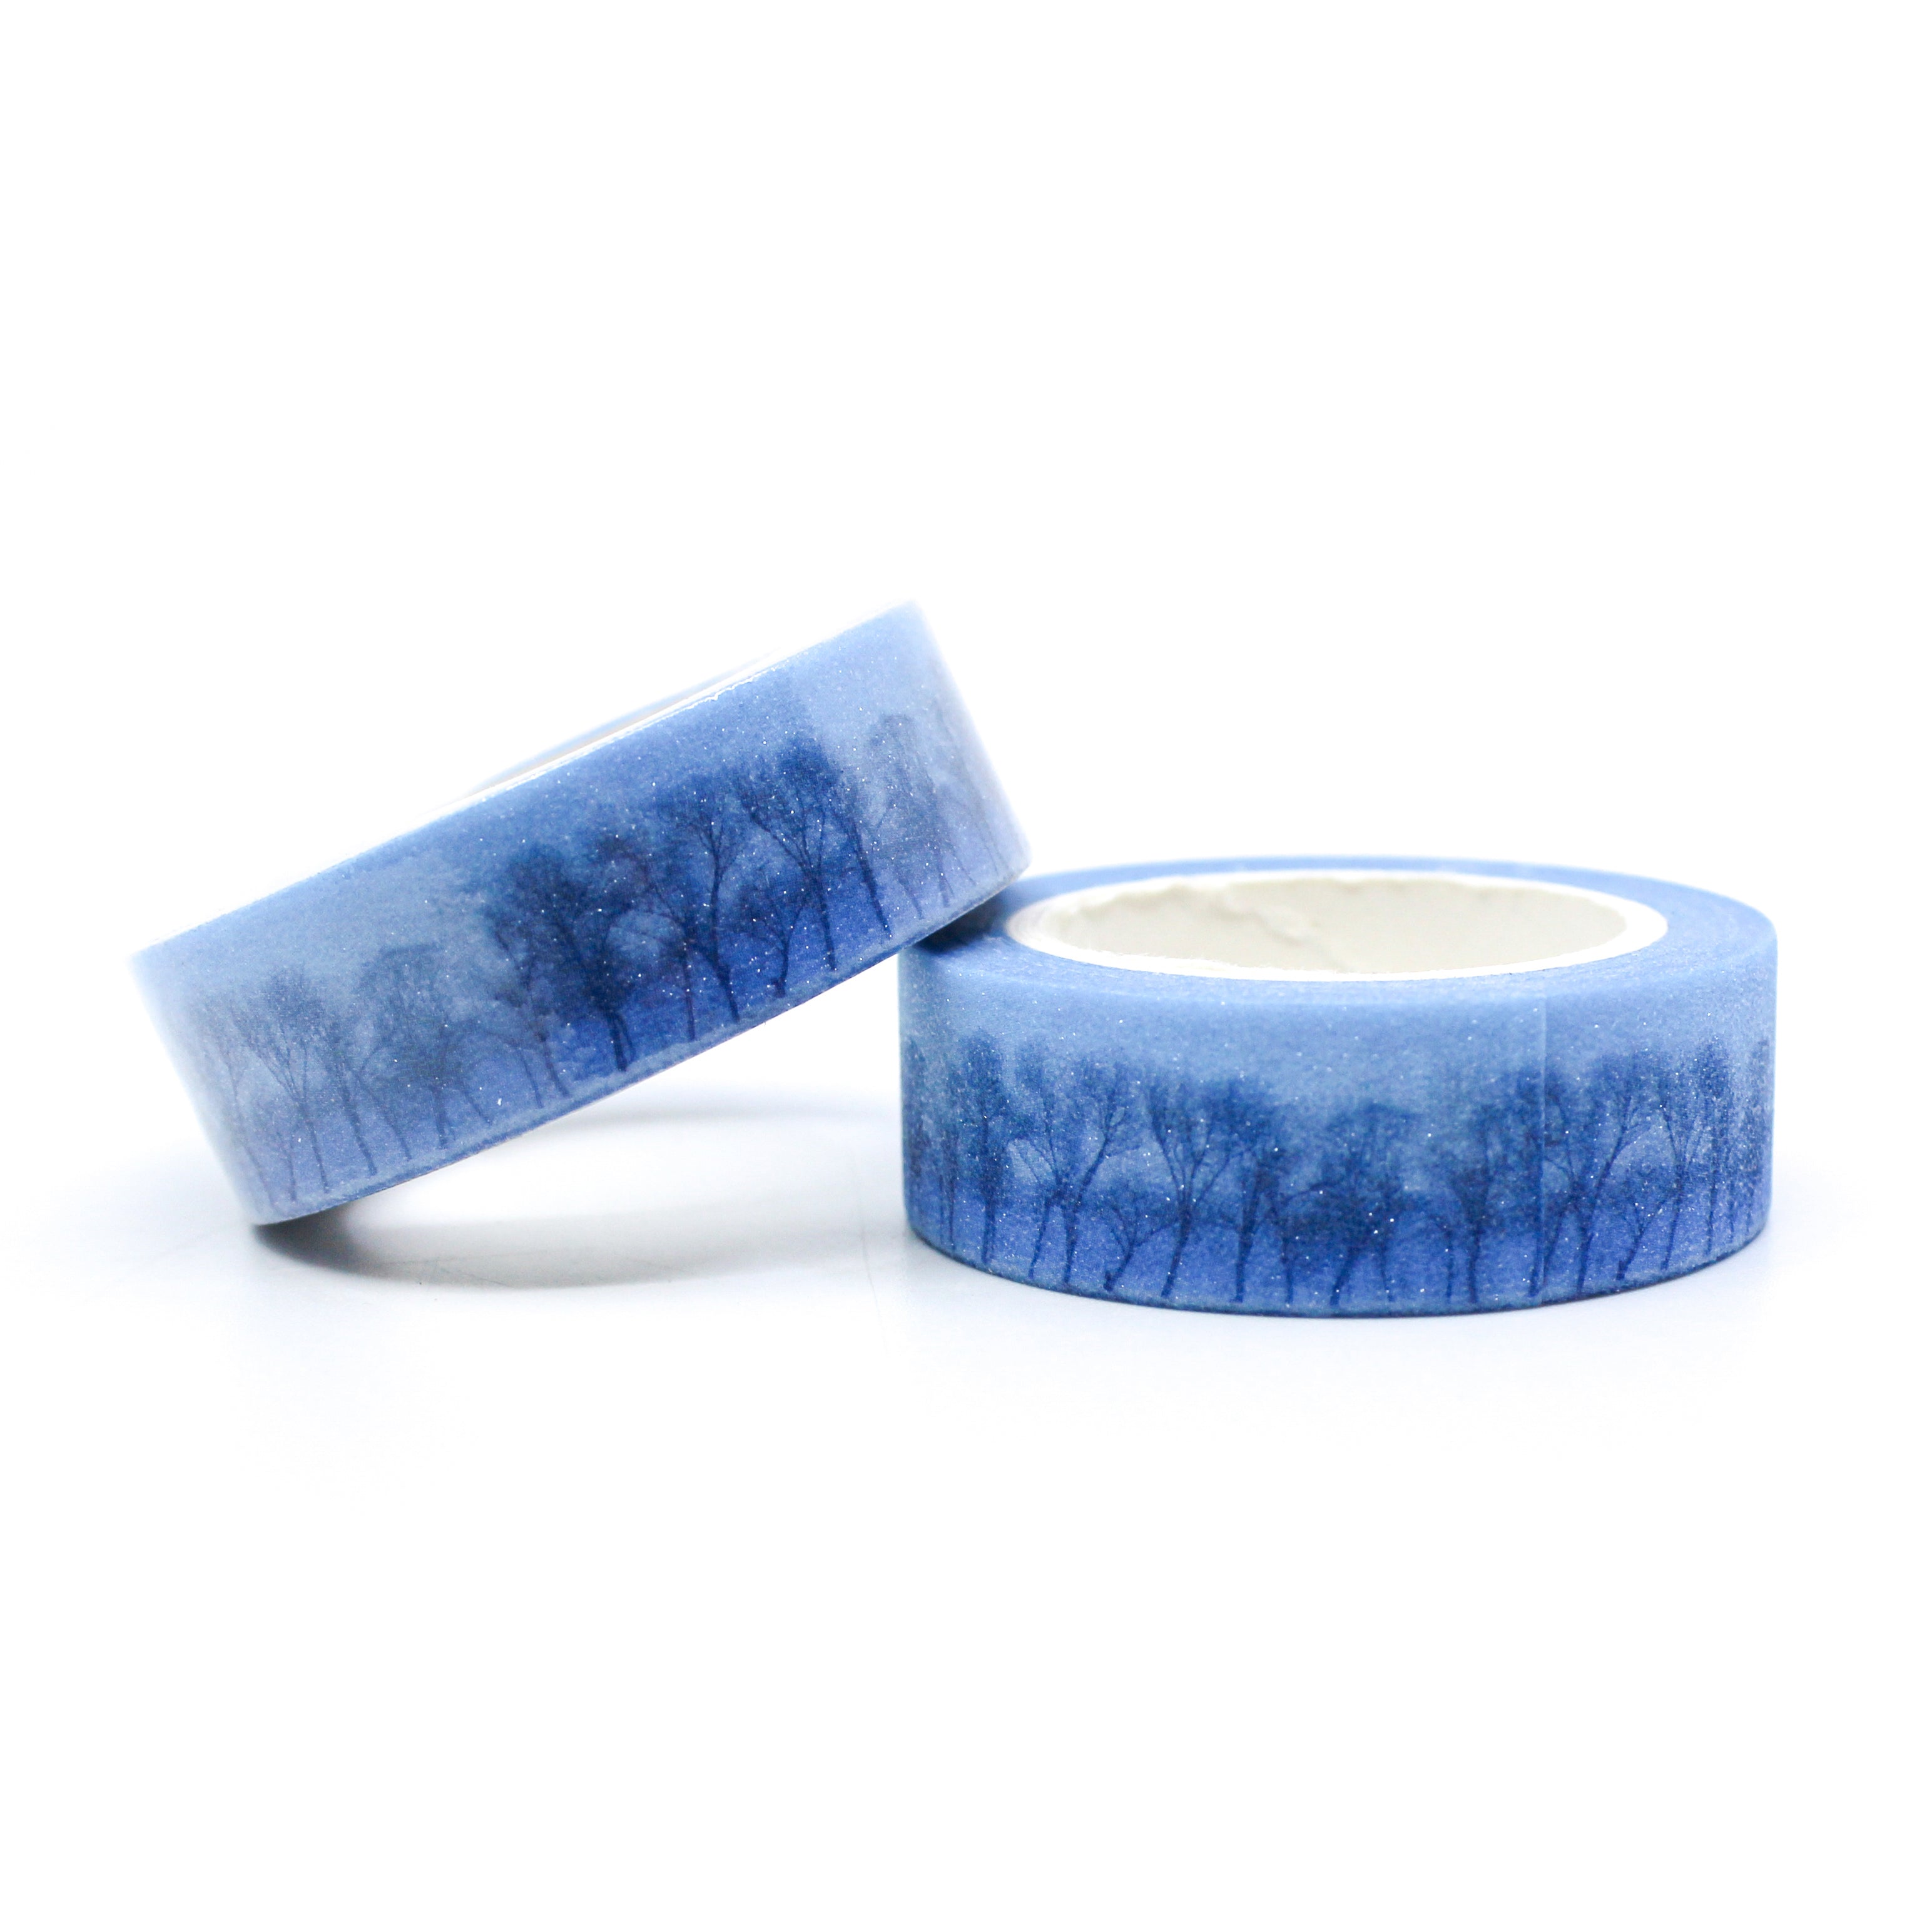 This is a beautiful and moody blue glitter winter Forest Trees landscape washi tape from BBB Supplies.